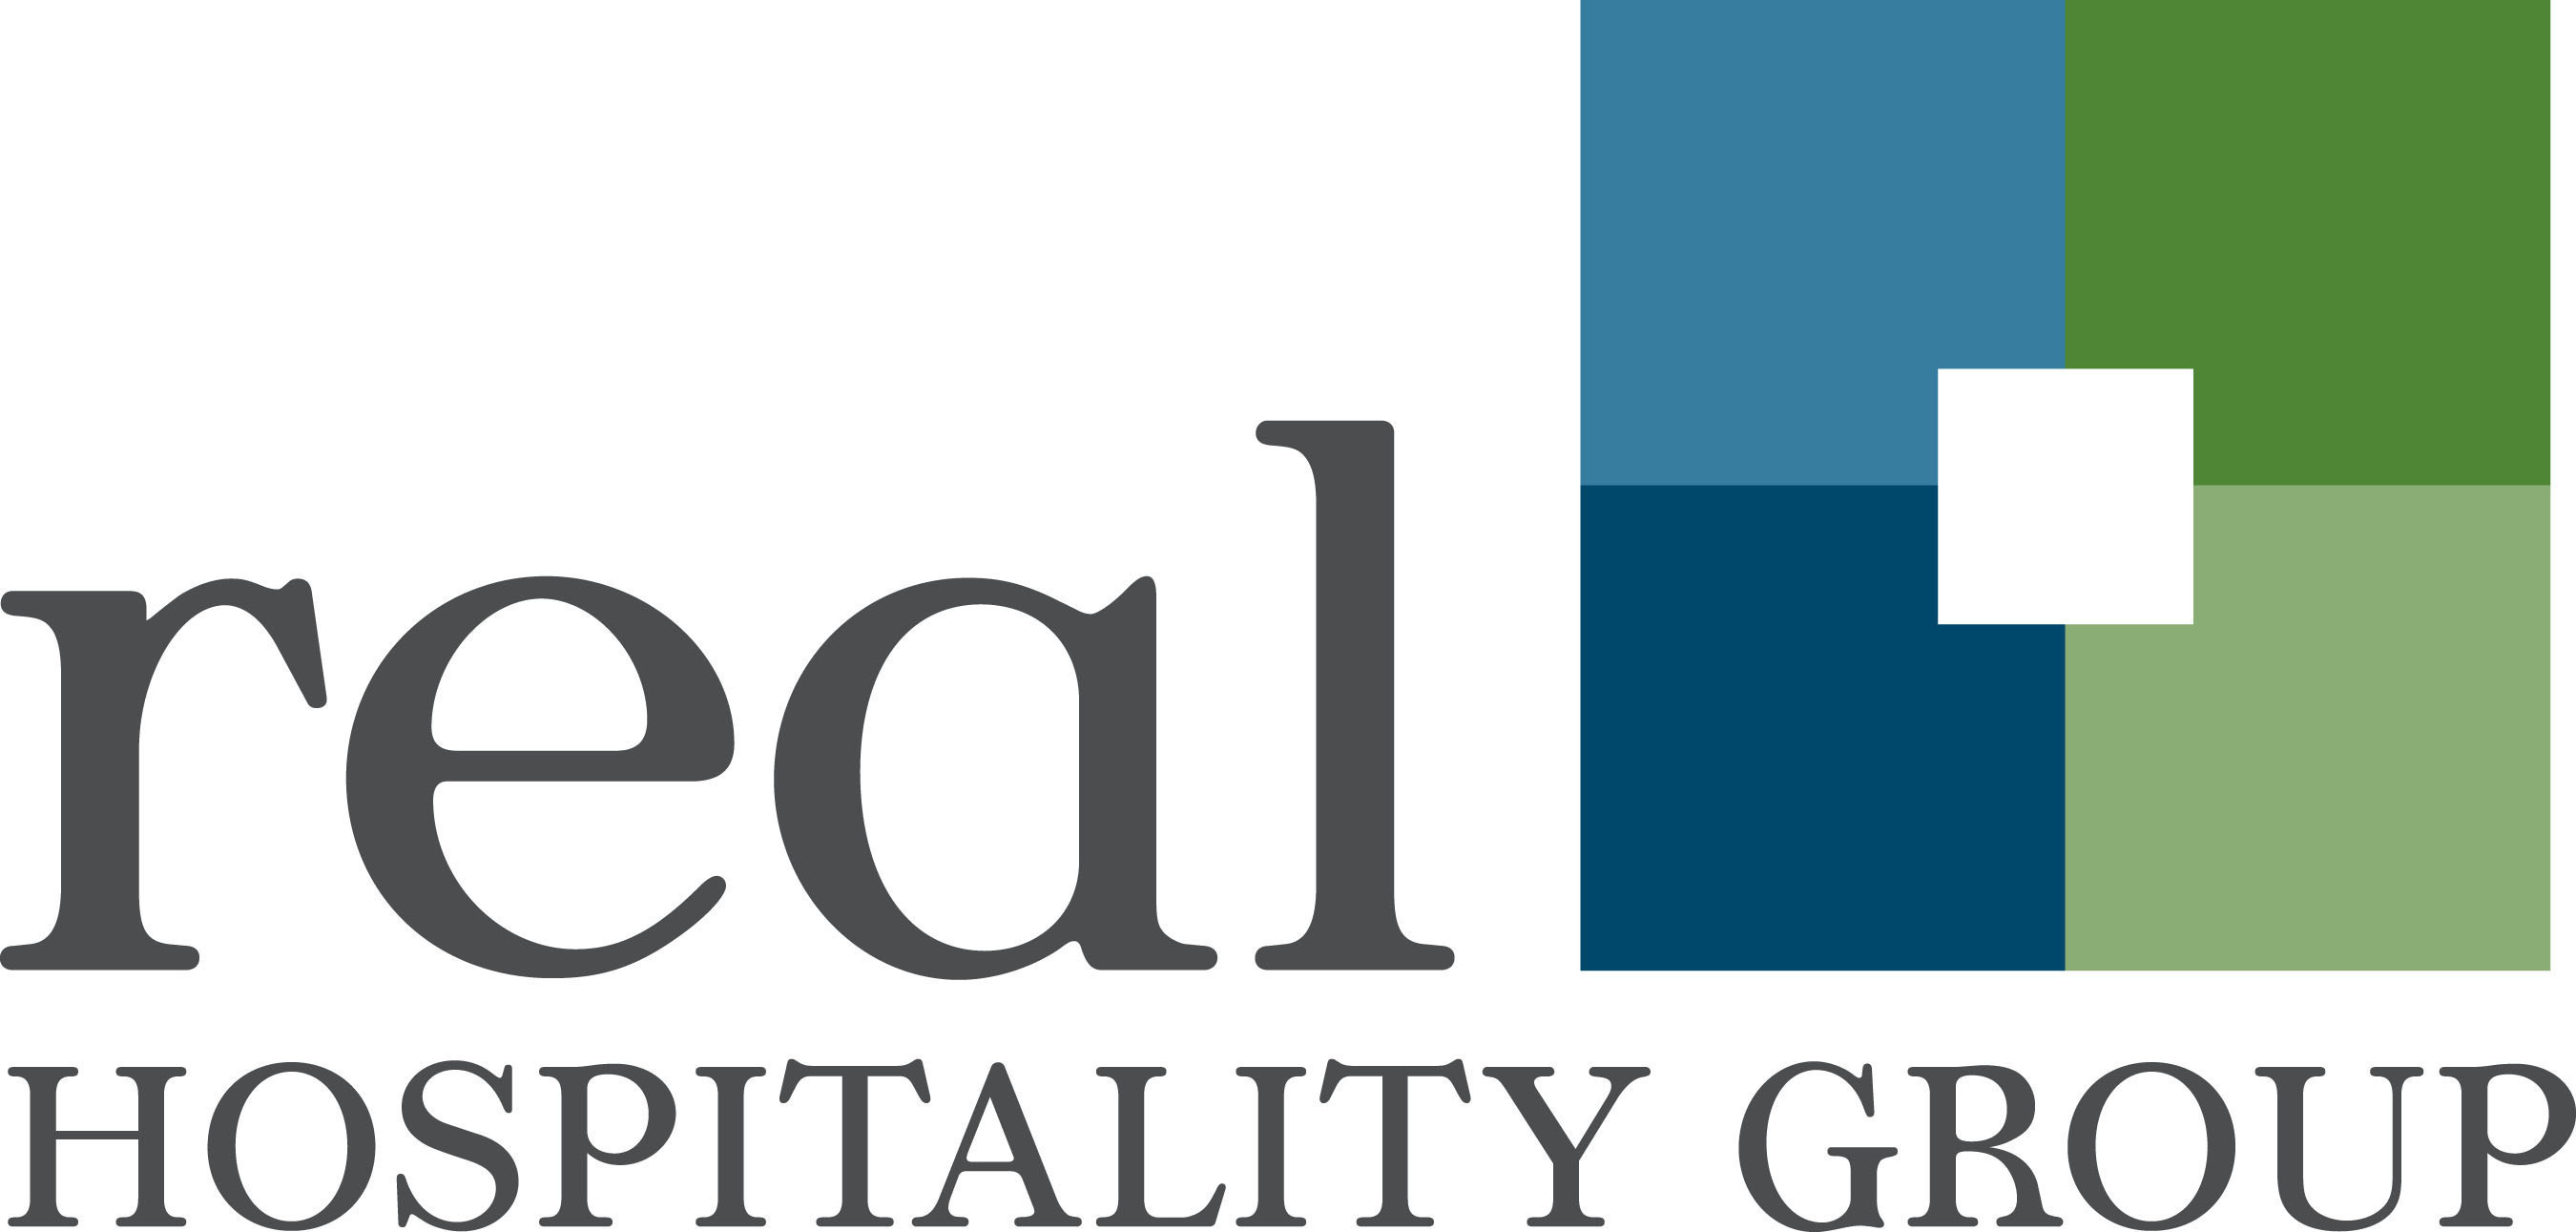 Real Hospitality Group (RHG) is headquartered in Ocean City, MD with a regional office in Midtown Manhattan in New York City, and comprises a team with more than 400 years of combined hospitality and travel industry experience. The Real Hospitality Group portfolio includes 58 hotel properties with an inventory of more than 7,618 rooms.